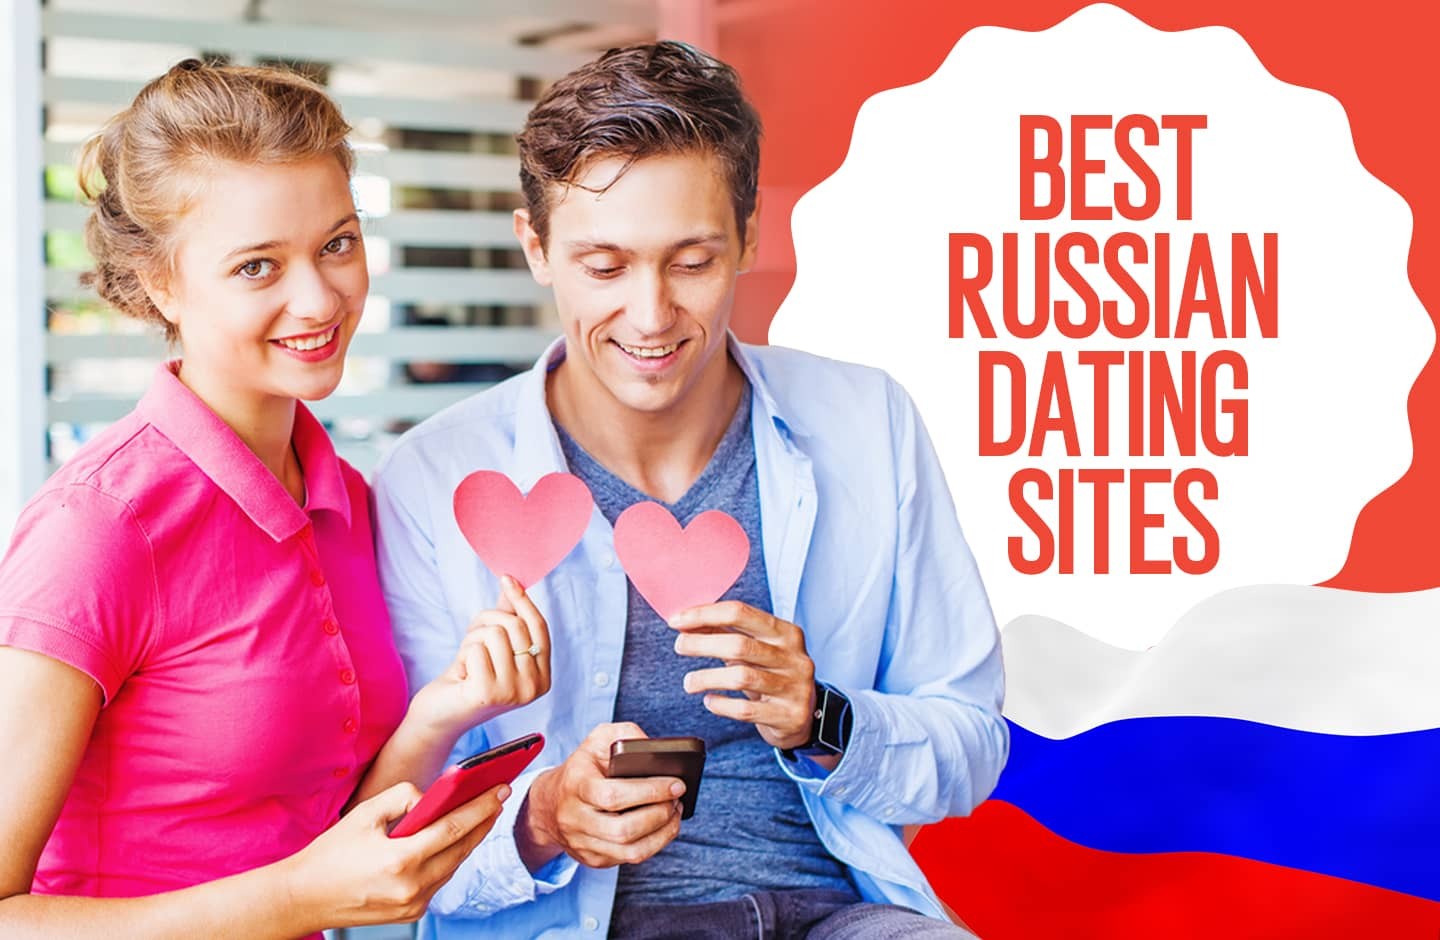 Russian free dating online Are there